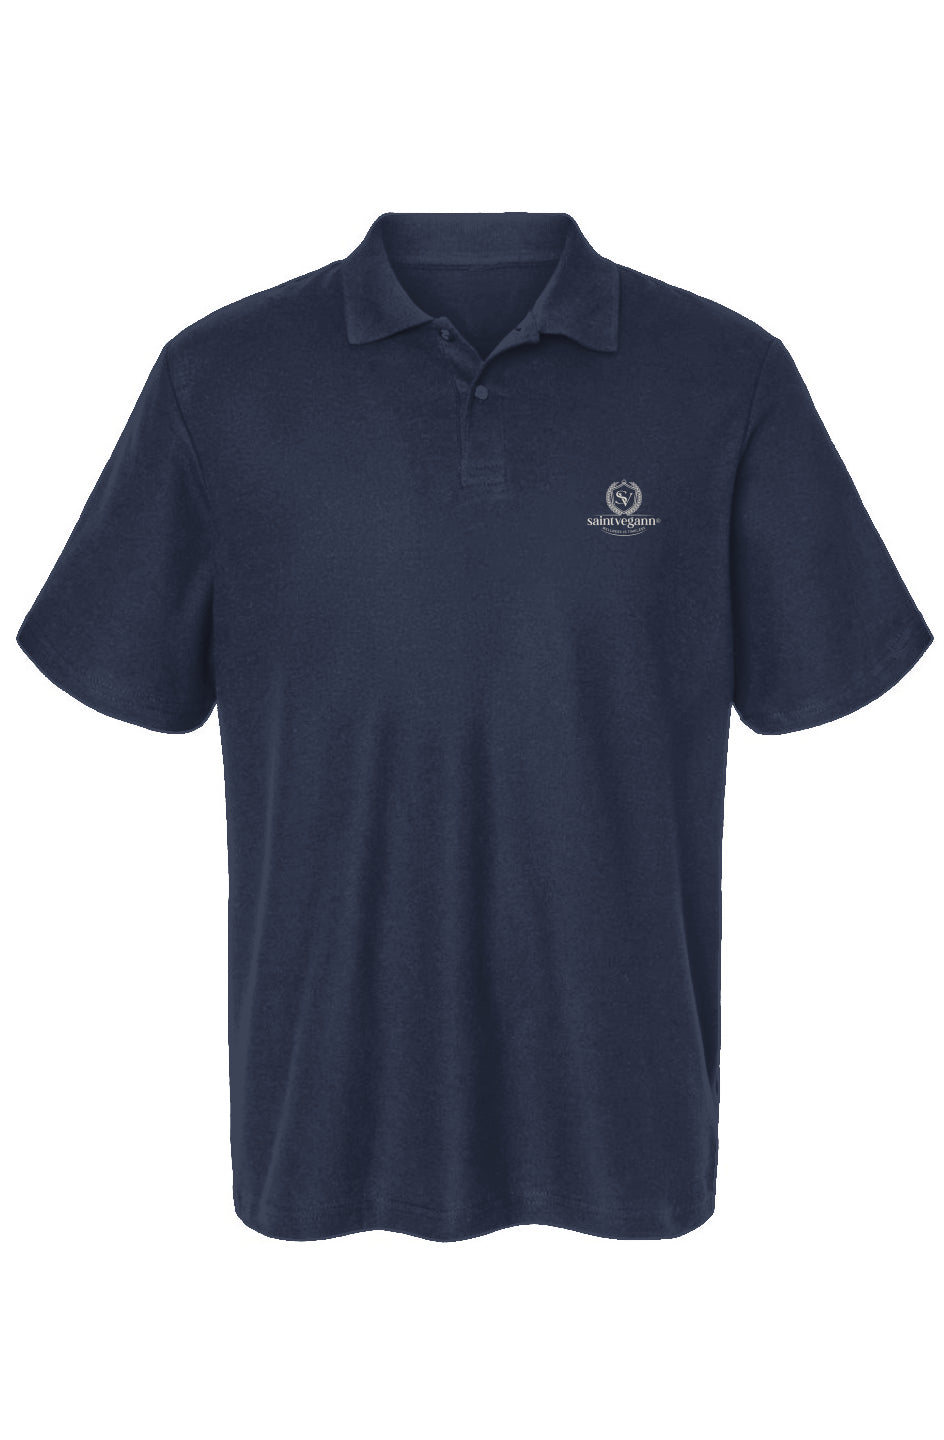 the new leaf polo in new england navy